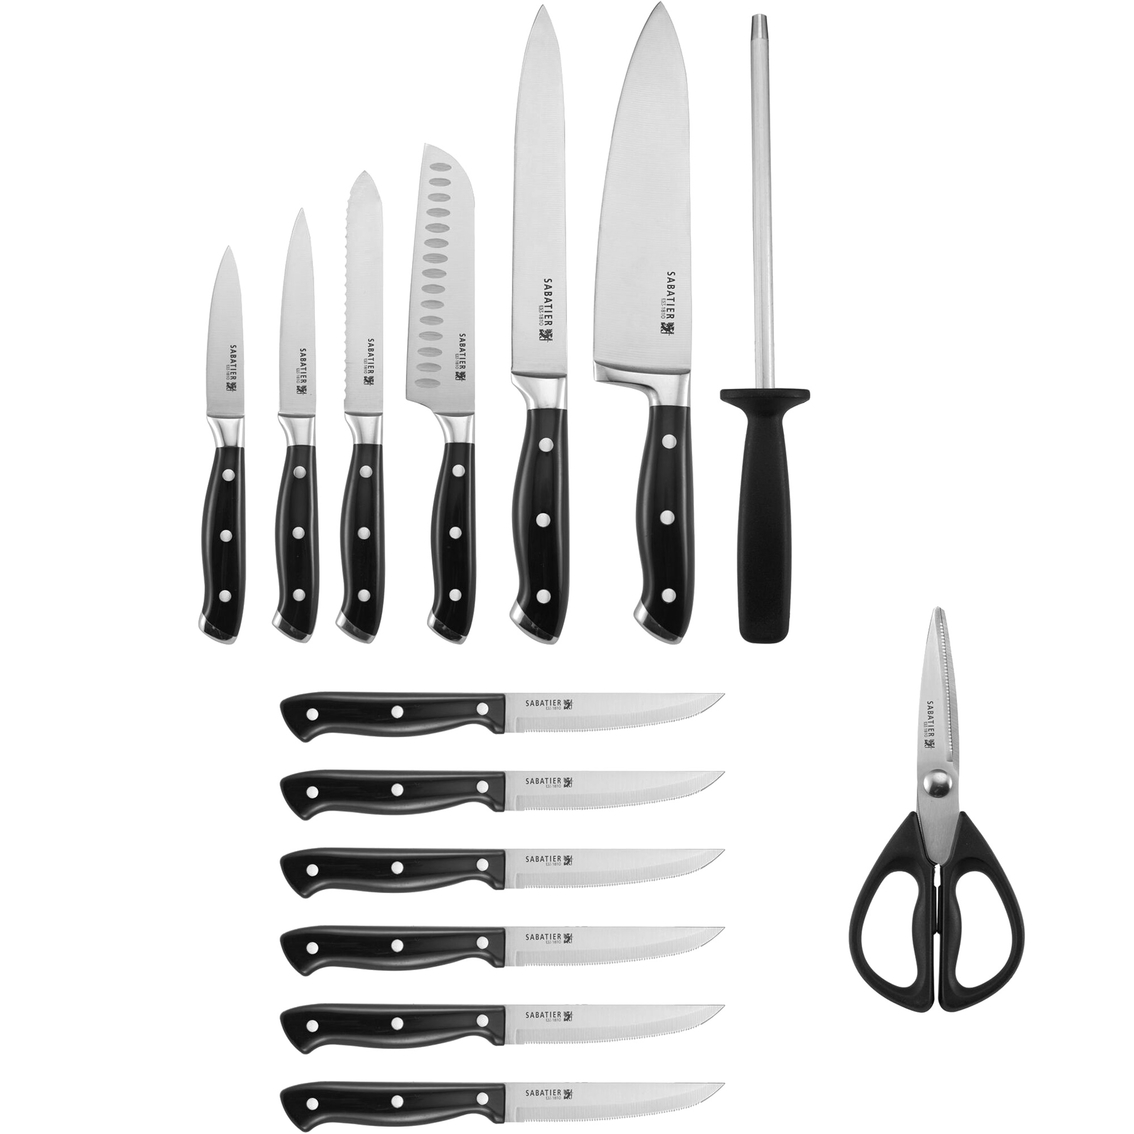 Sabatier 15 pc. Forged Triple Riveted Cutlery Set in Acacia Wood Block - Image 2 of 5